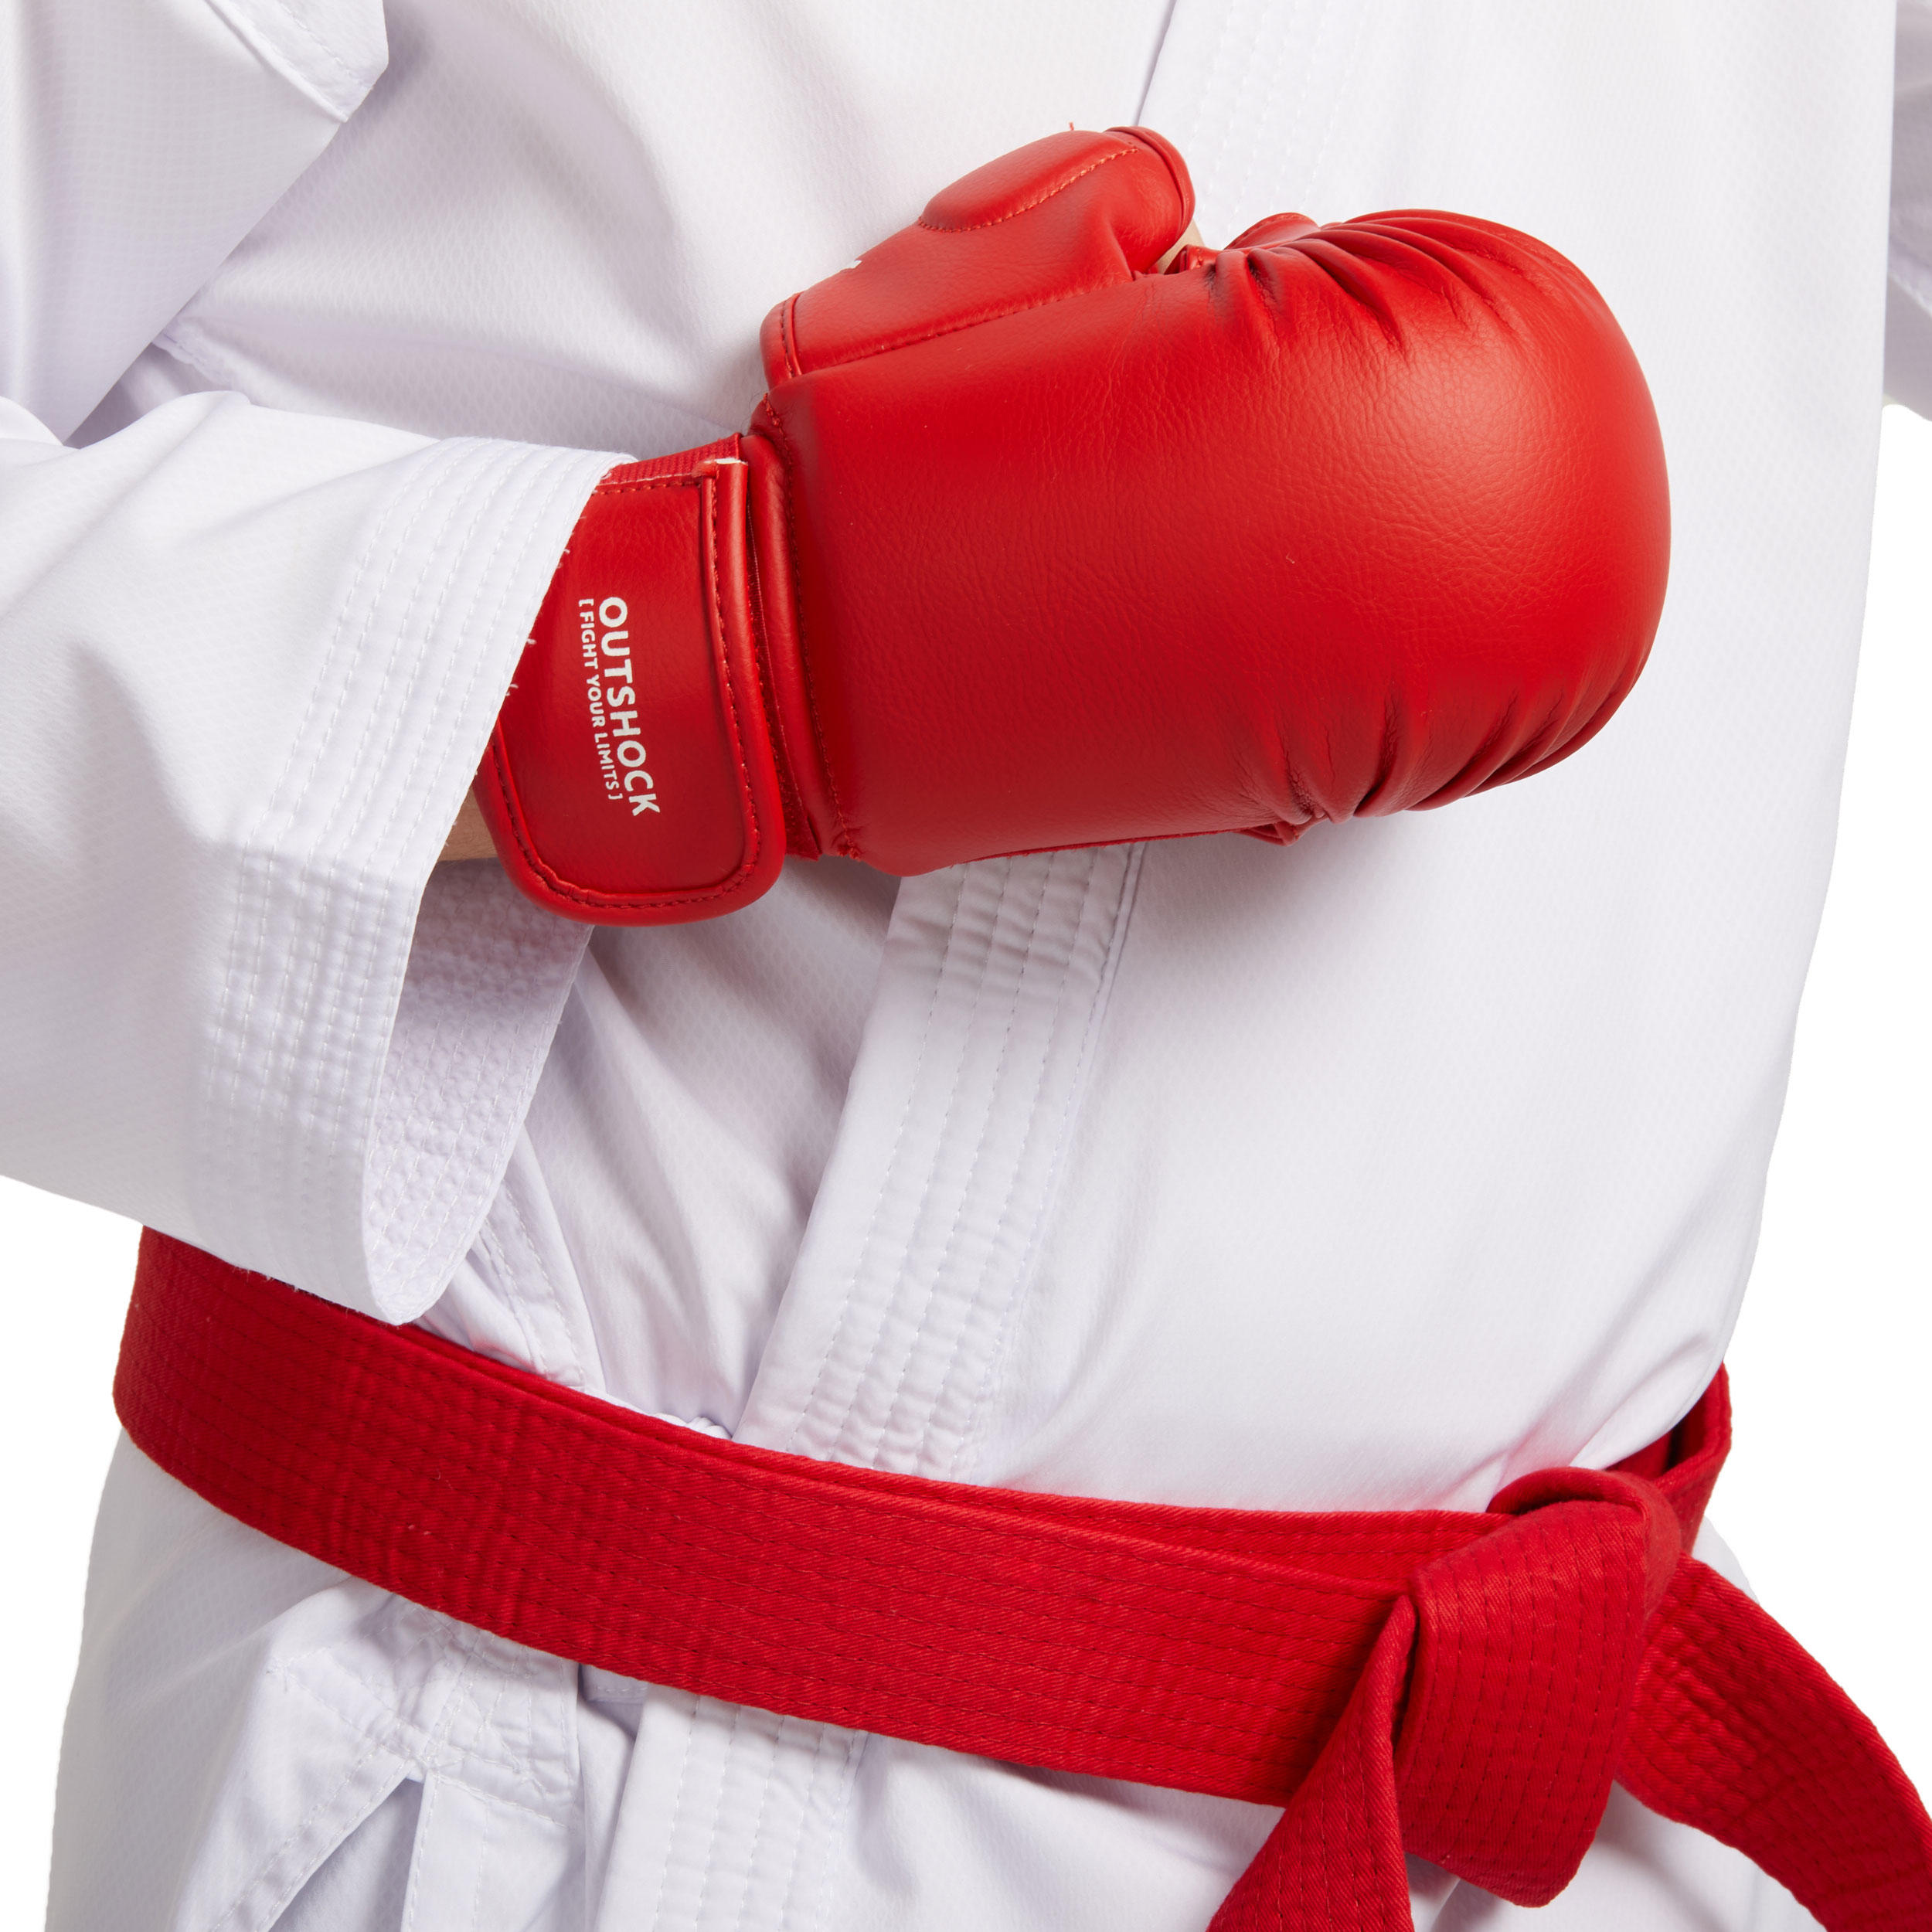 Karate Mitts 900 - Red 7/9